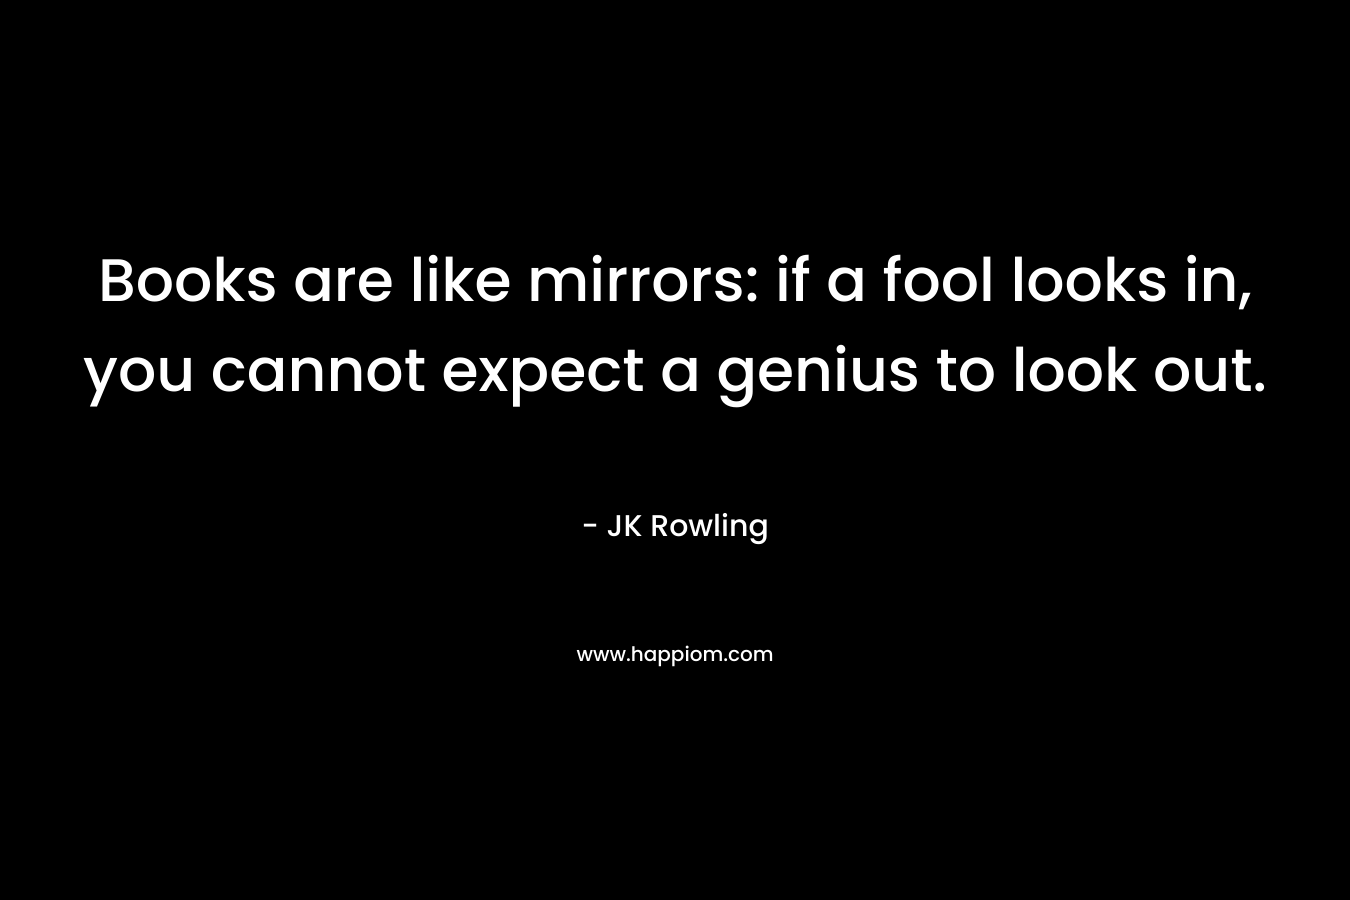 Books are like mirrors: if a fool looks in, you cannot expect a genius to look out.